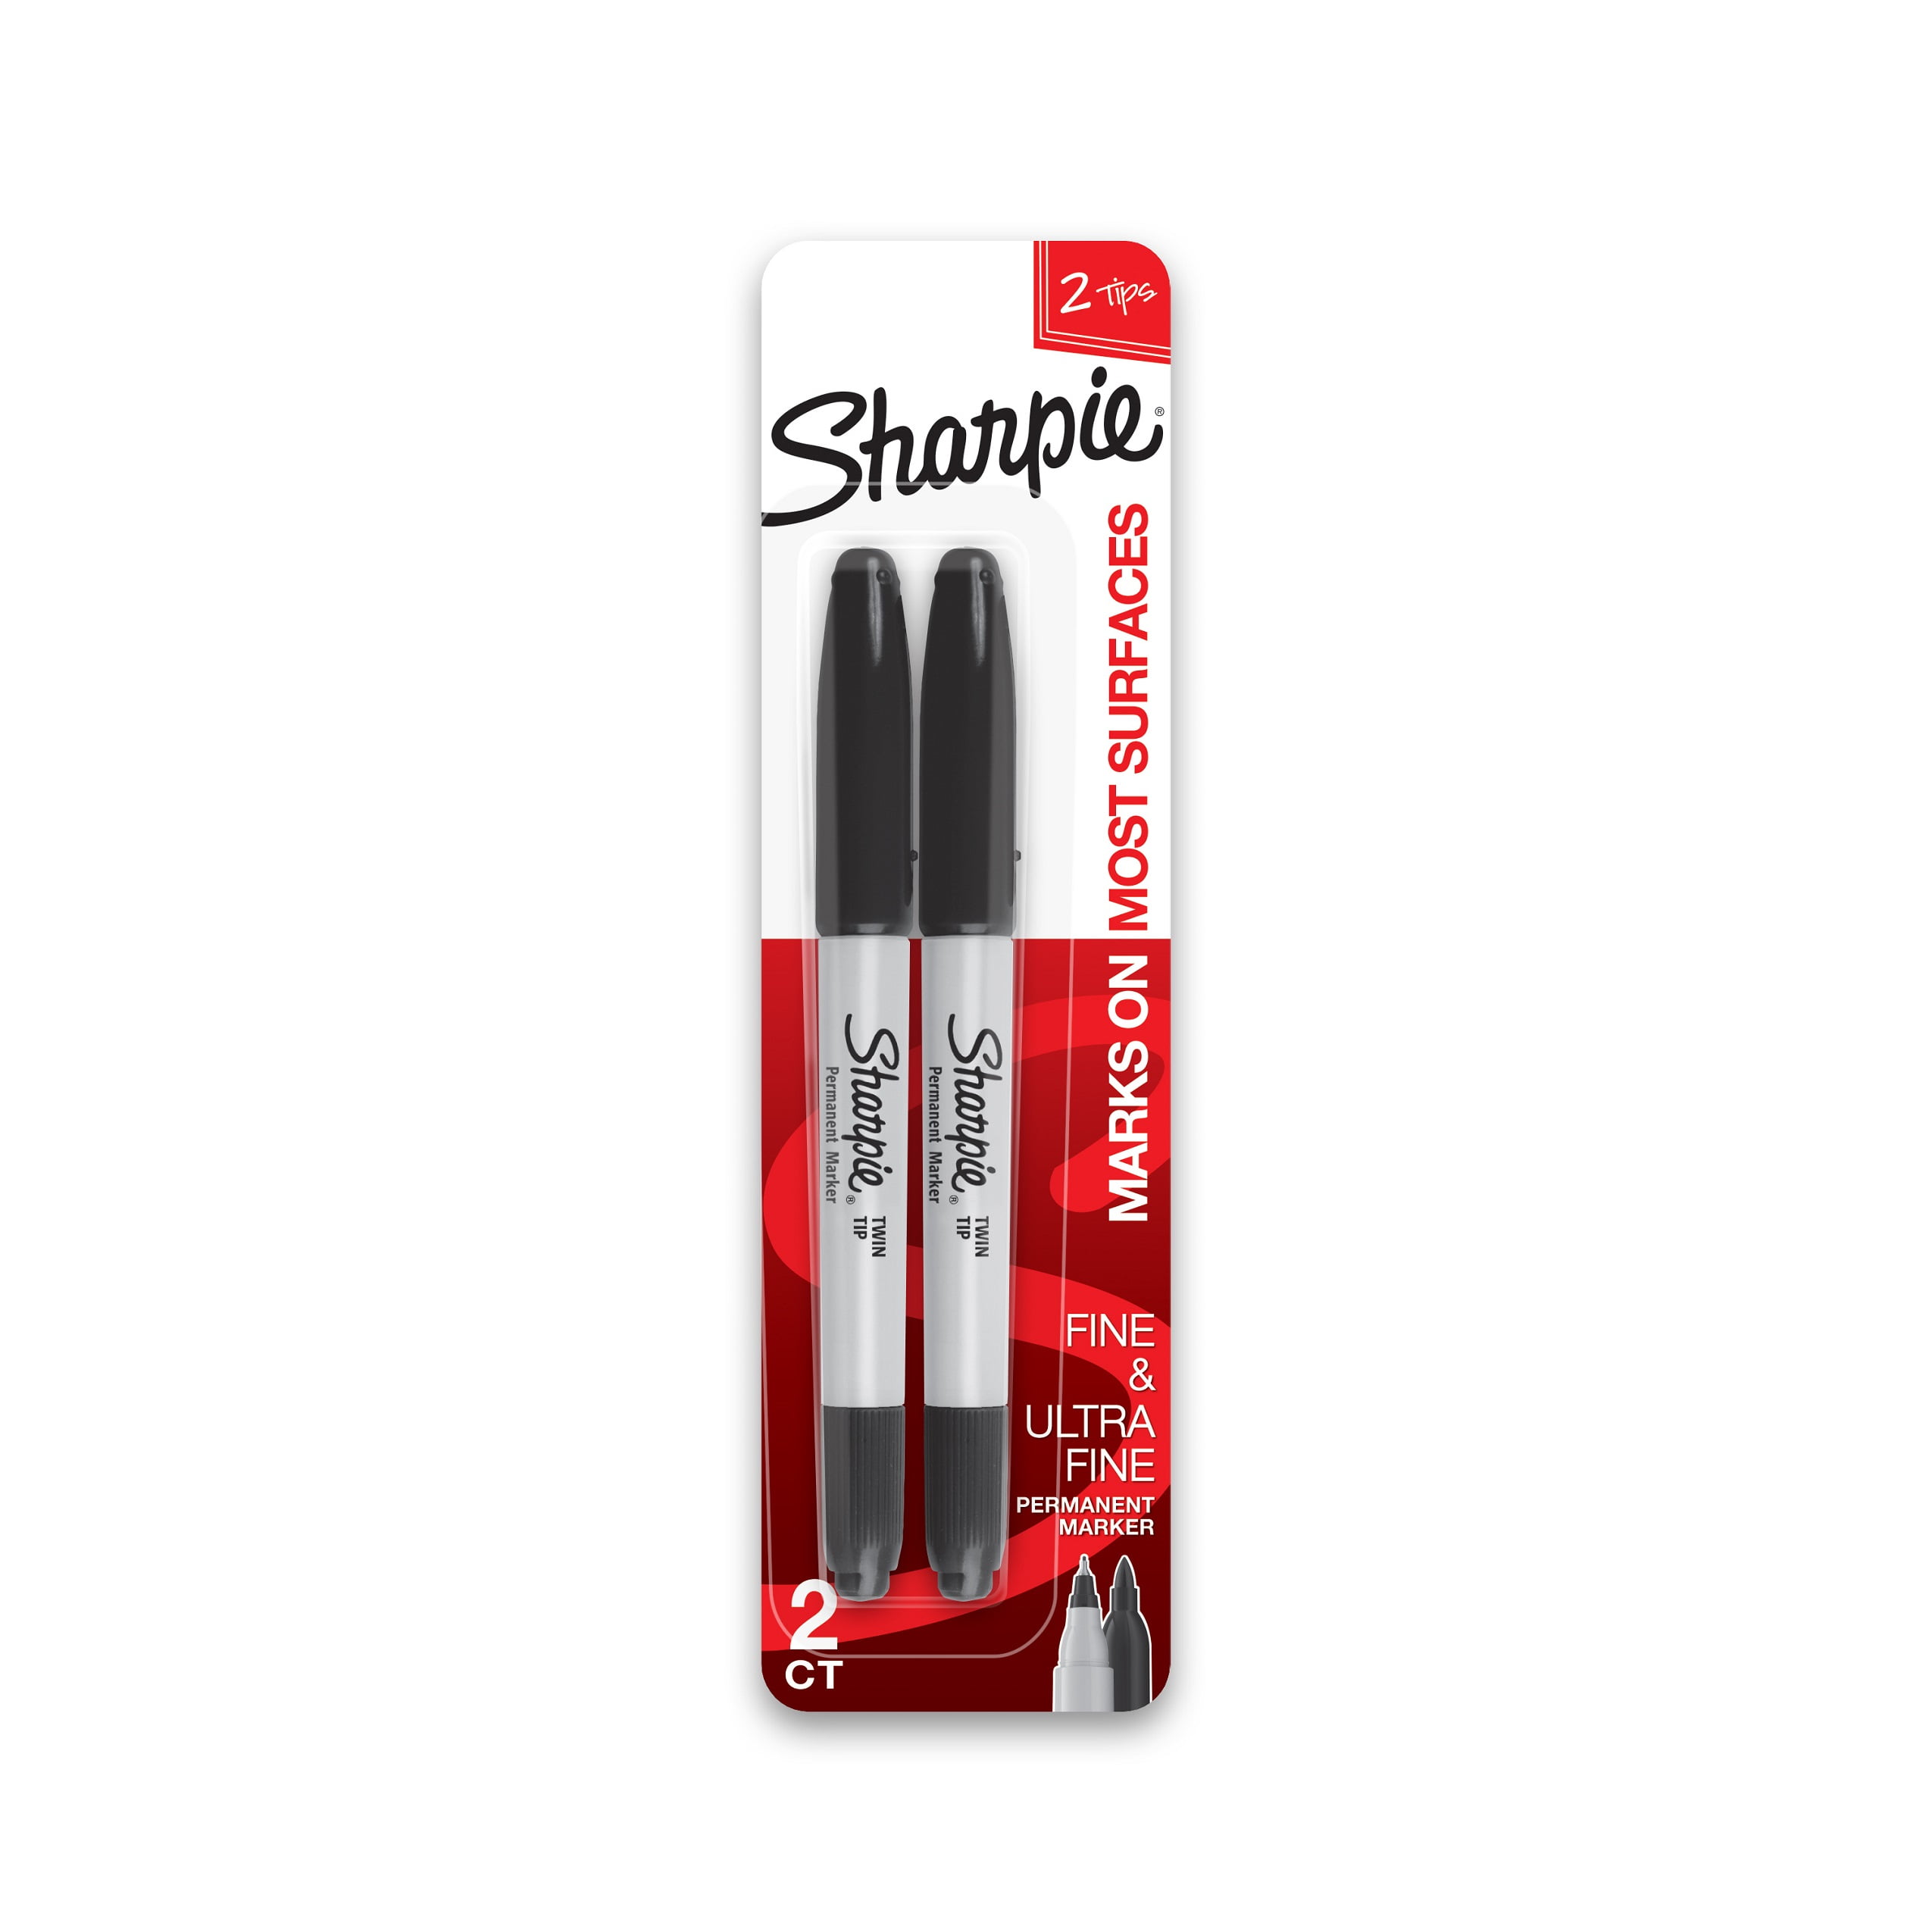 Sharpie Dual Twin Tip Permanent Marker Pens Brightly Coloured Fine+Ultra Fine 